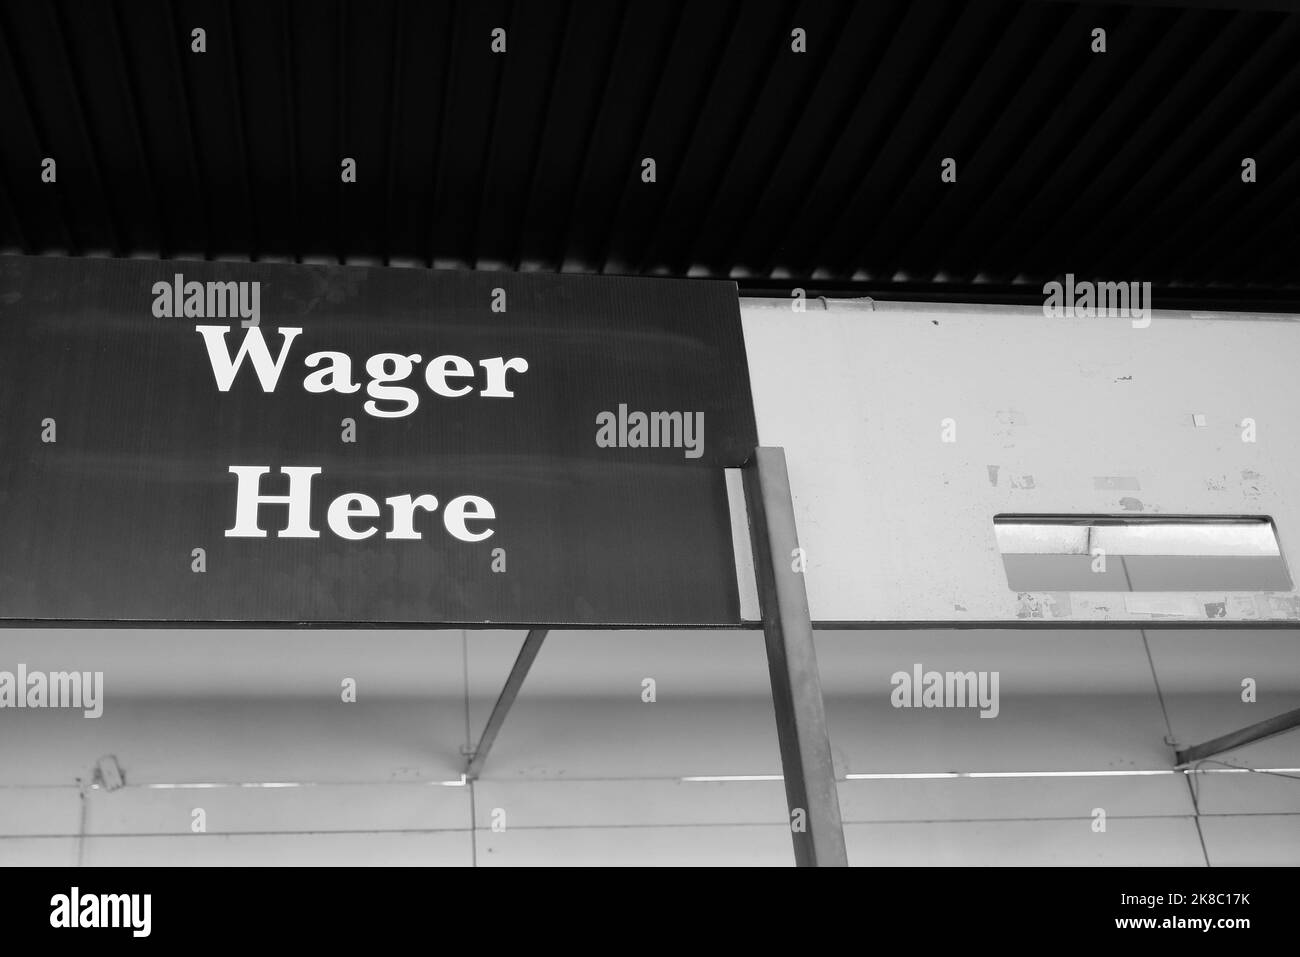 Wager Here sign at a racetrack; luck, chance, gambling, risk, wagering, betting, futures, investments, speculation, odds, Stock Photo